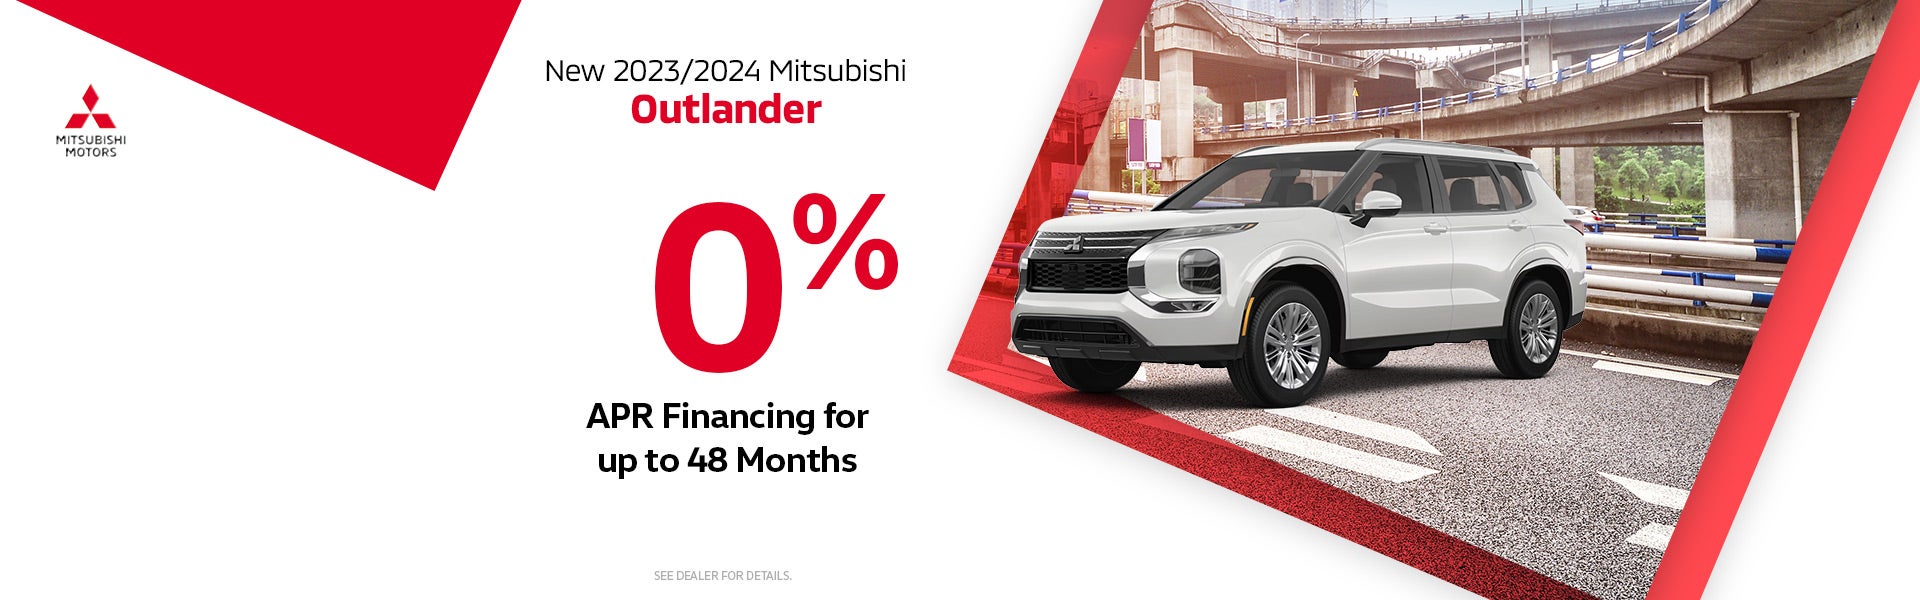 2023/2024 Outlander 0% APR up to 48 Months